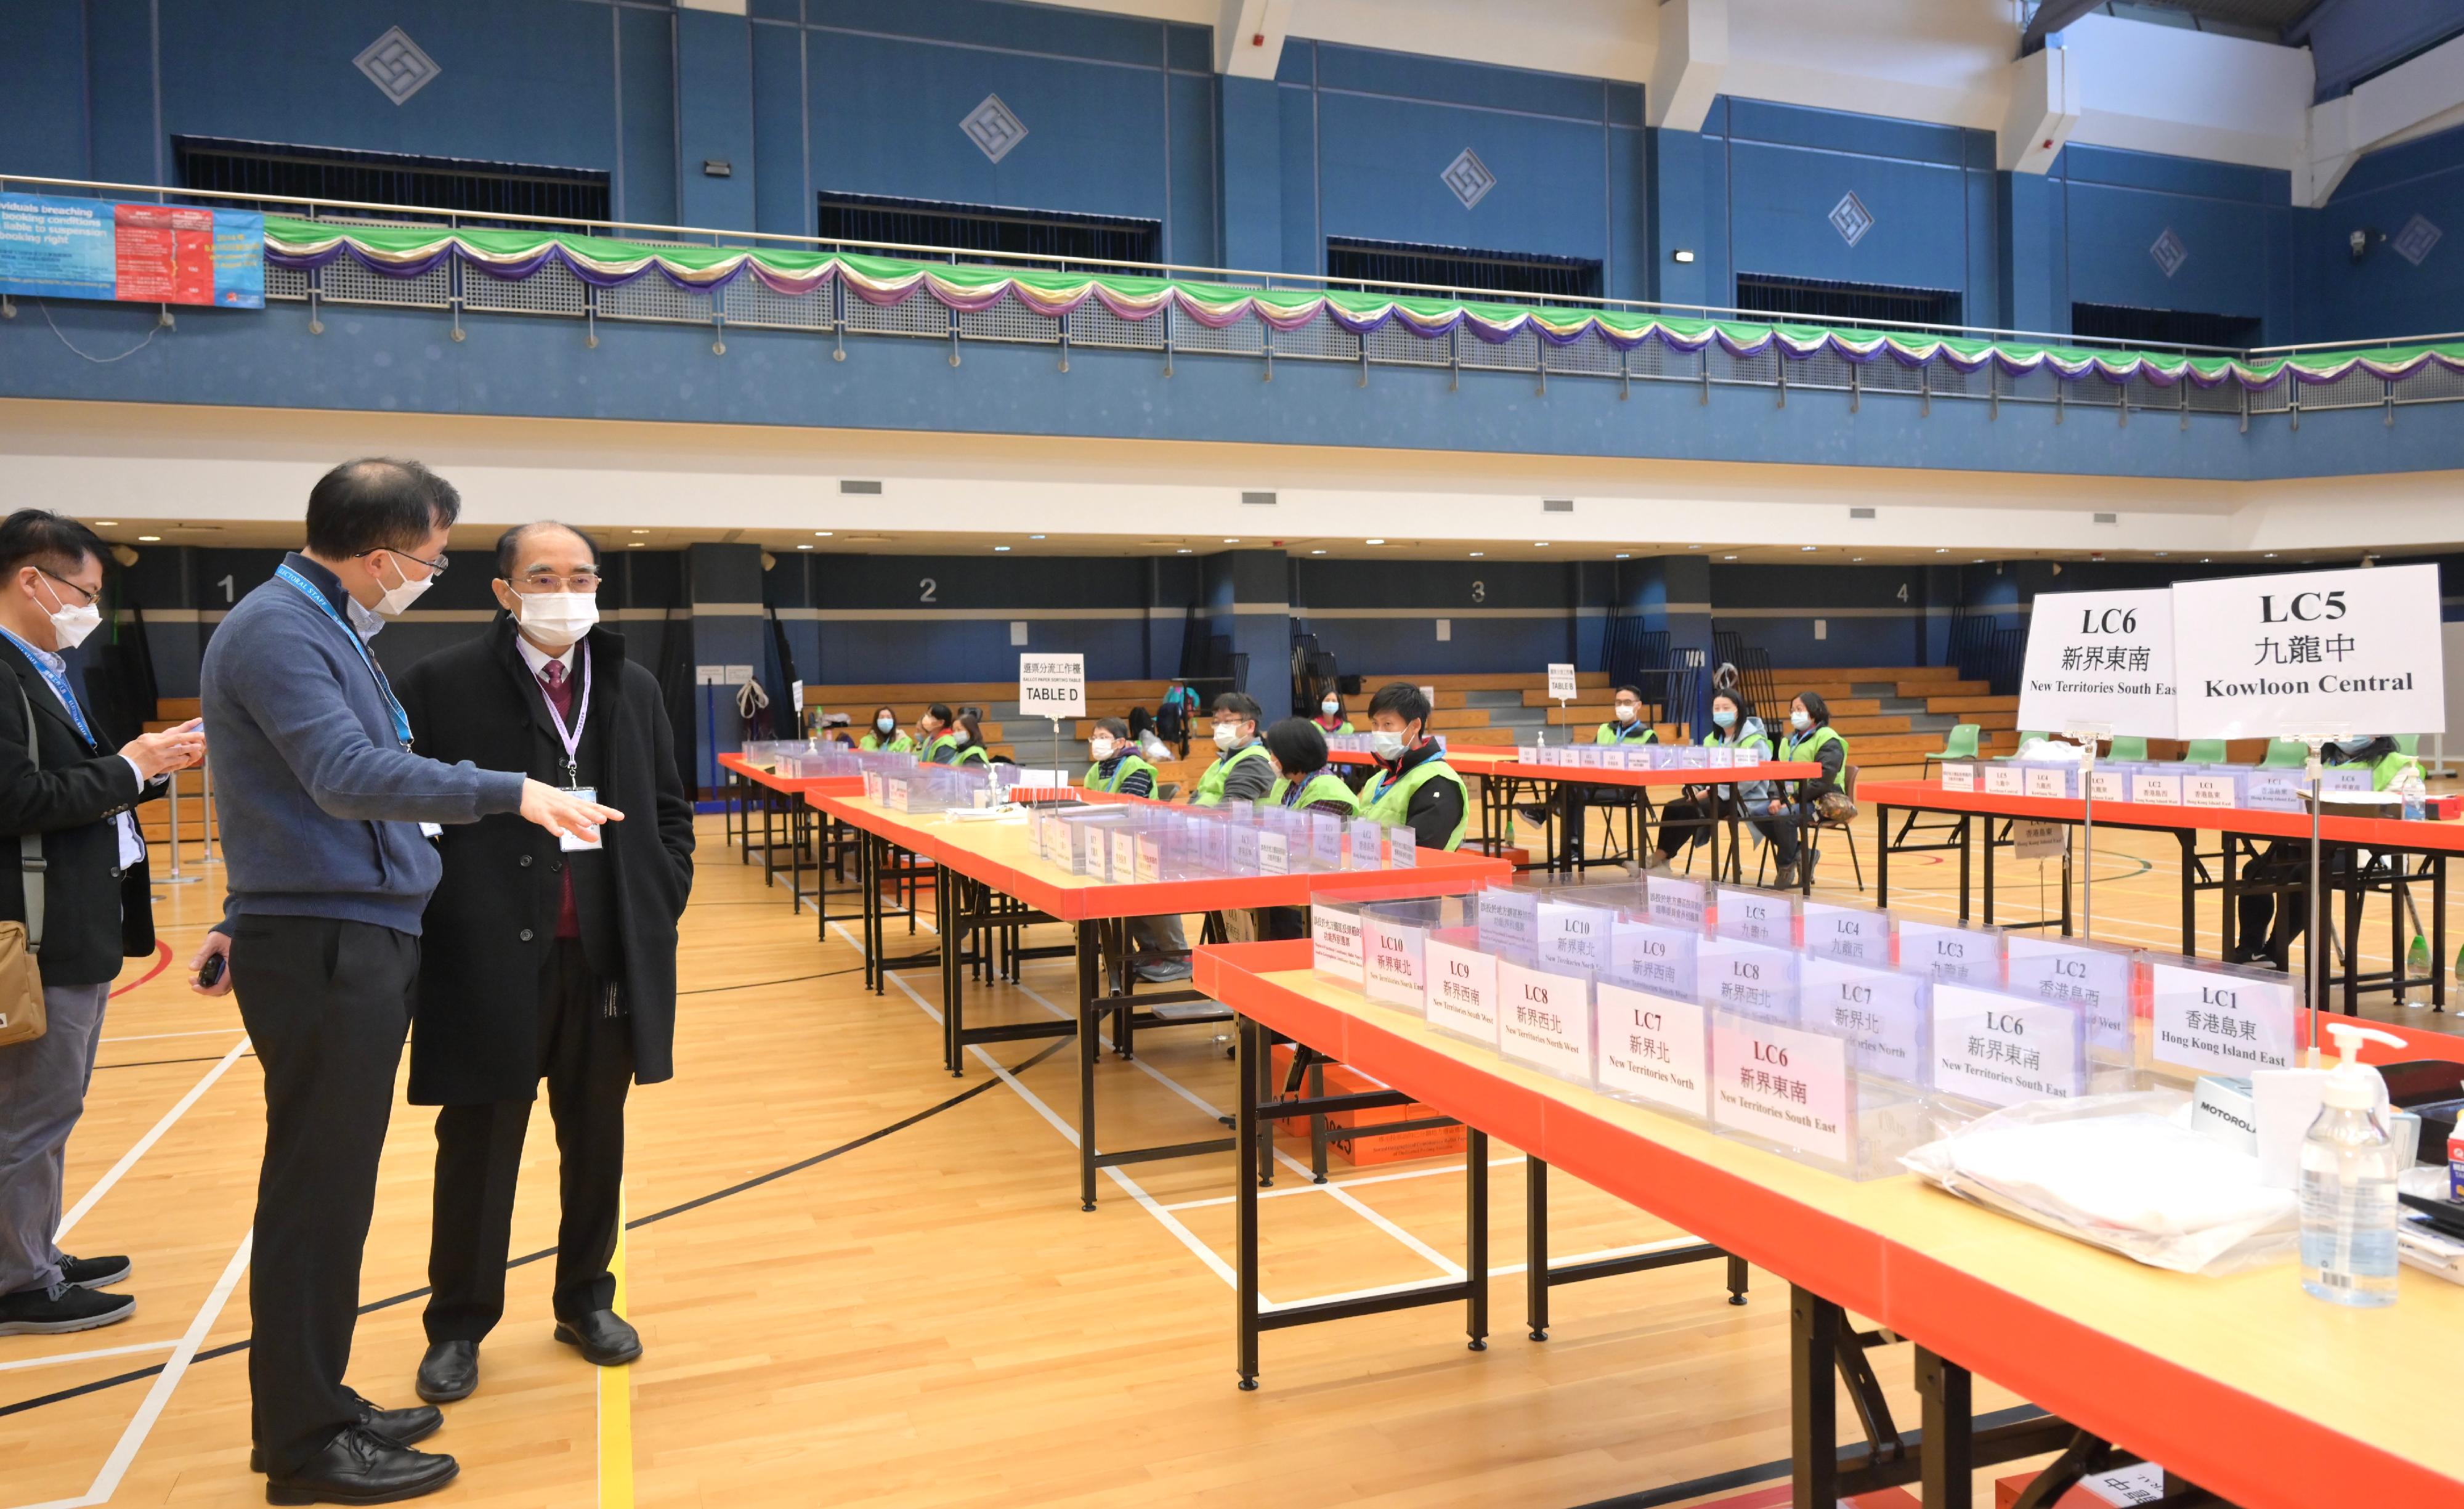 Electoral Affairs Commission member Mr Arthur Luk, SC (right), today (December 19) visits the ballot paper sorting station of the 2021 Legislative Council General Election at Shun Lee Tsuen Sports Centre.